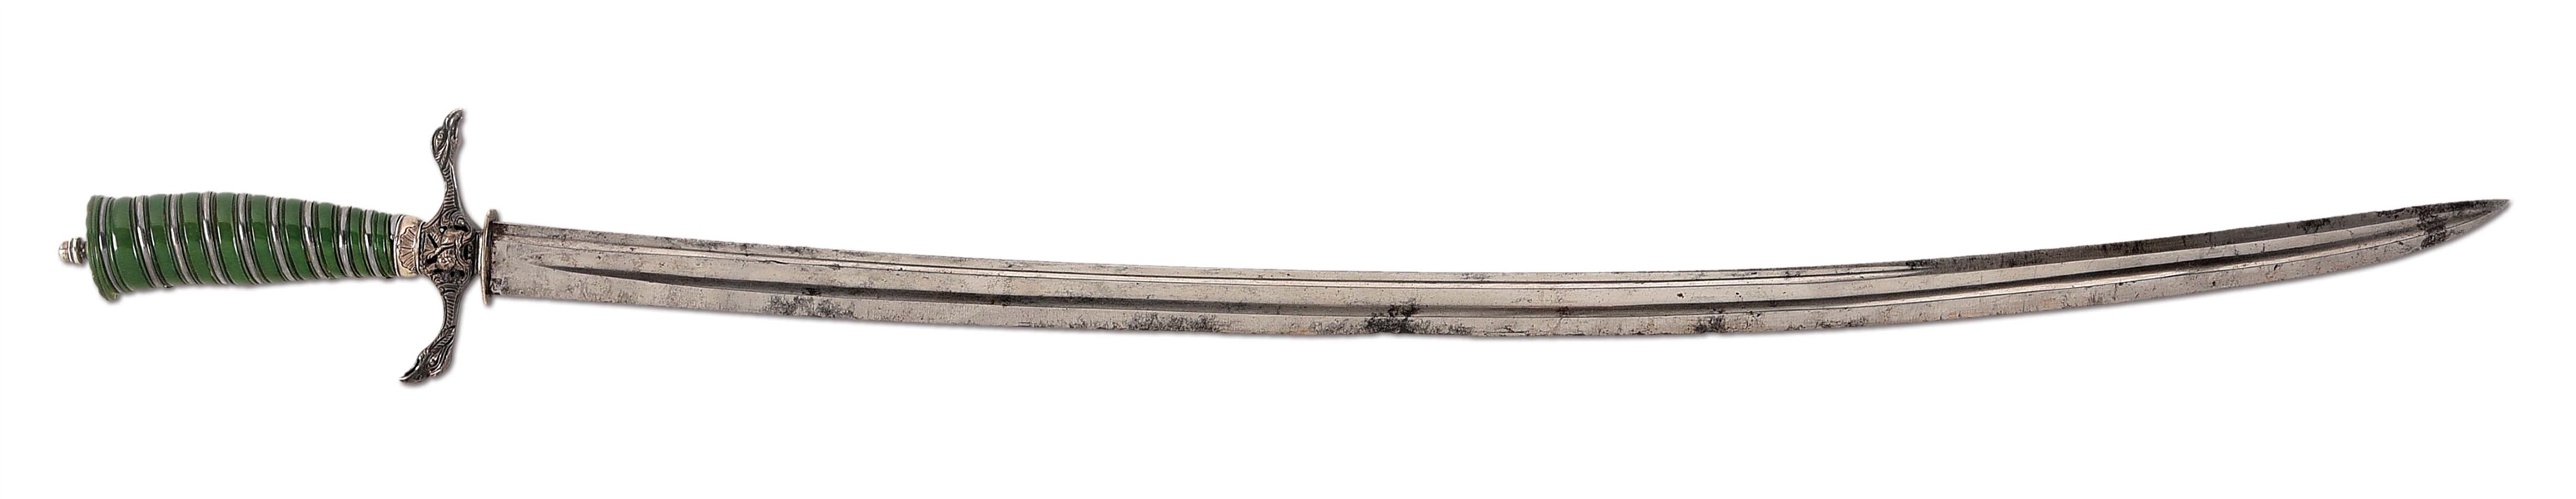 FINE AMERICAN ATTRIBUTED SILVER MOUNTED CUTTOE OR OFFICERS SWORD.